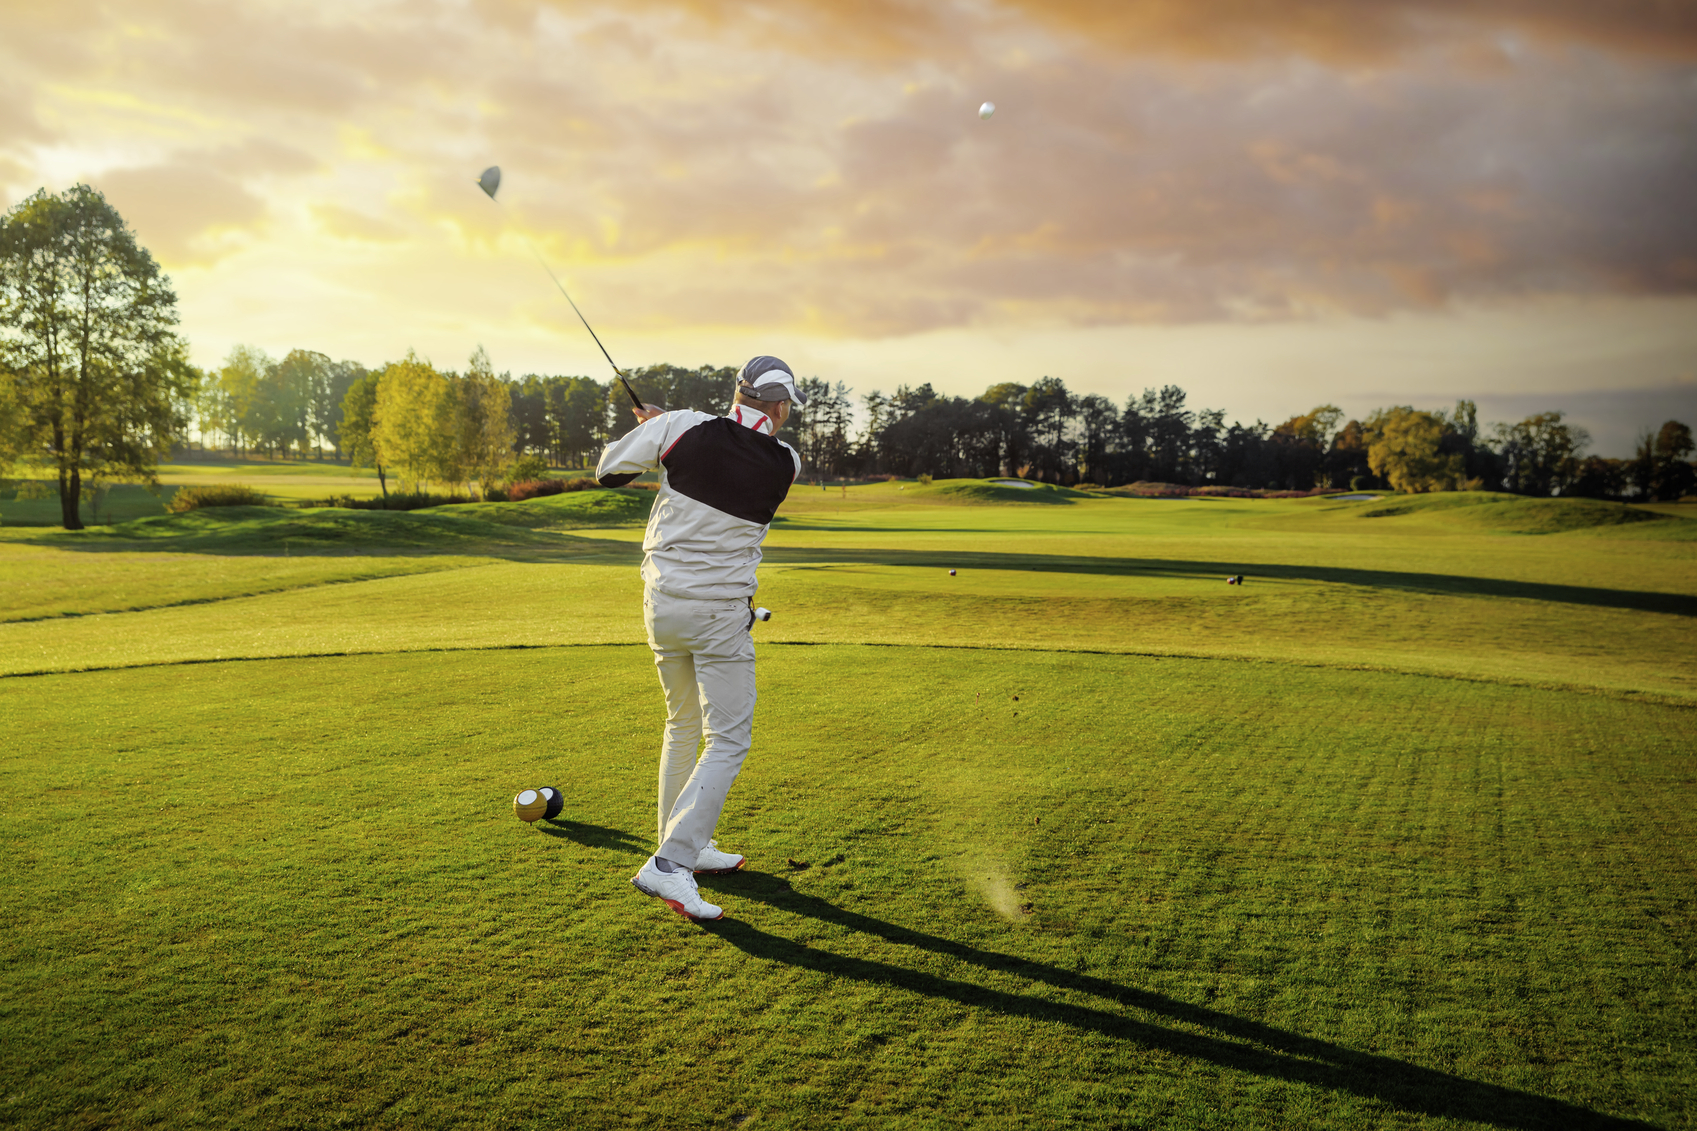 Astym Therapy improves golf swing